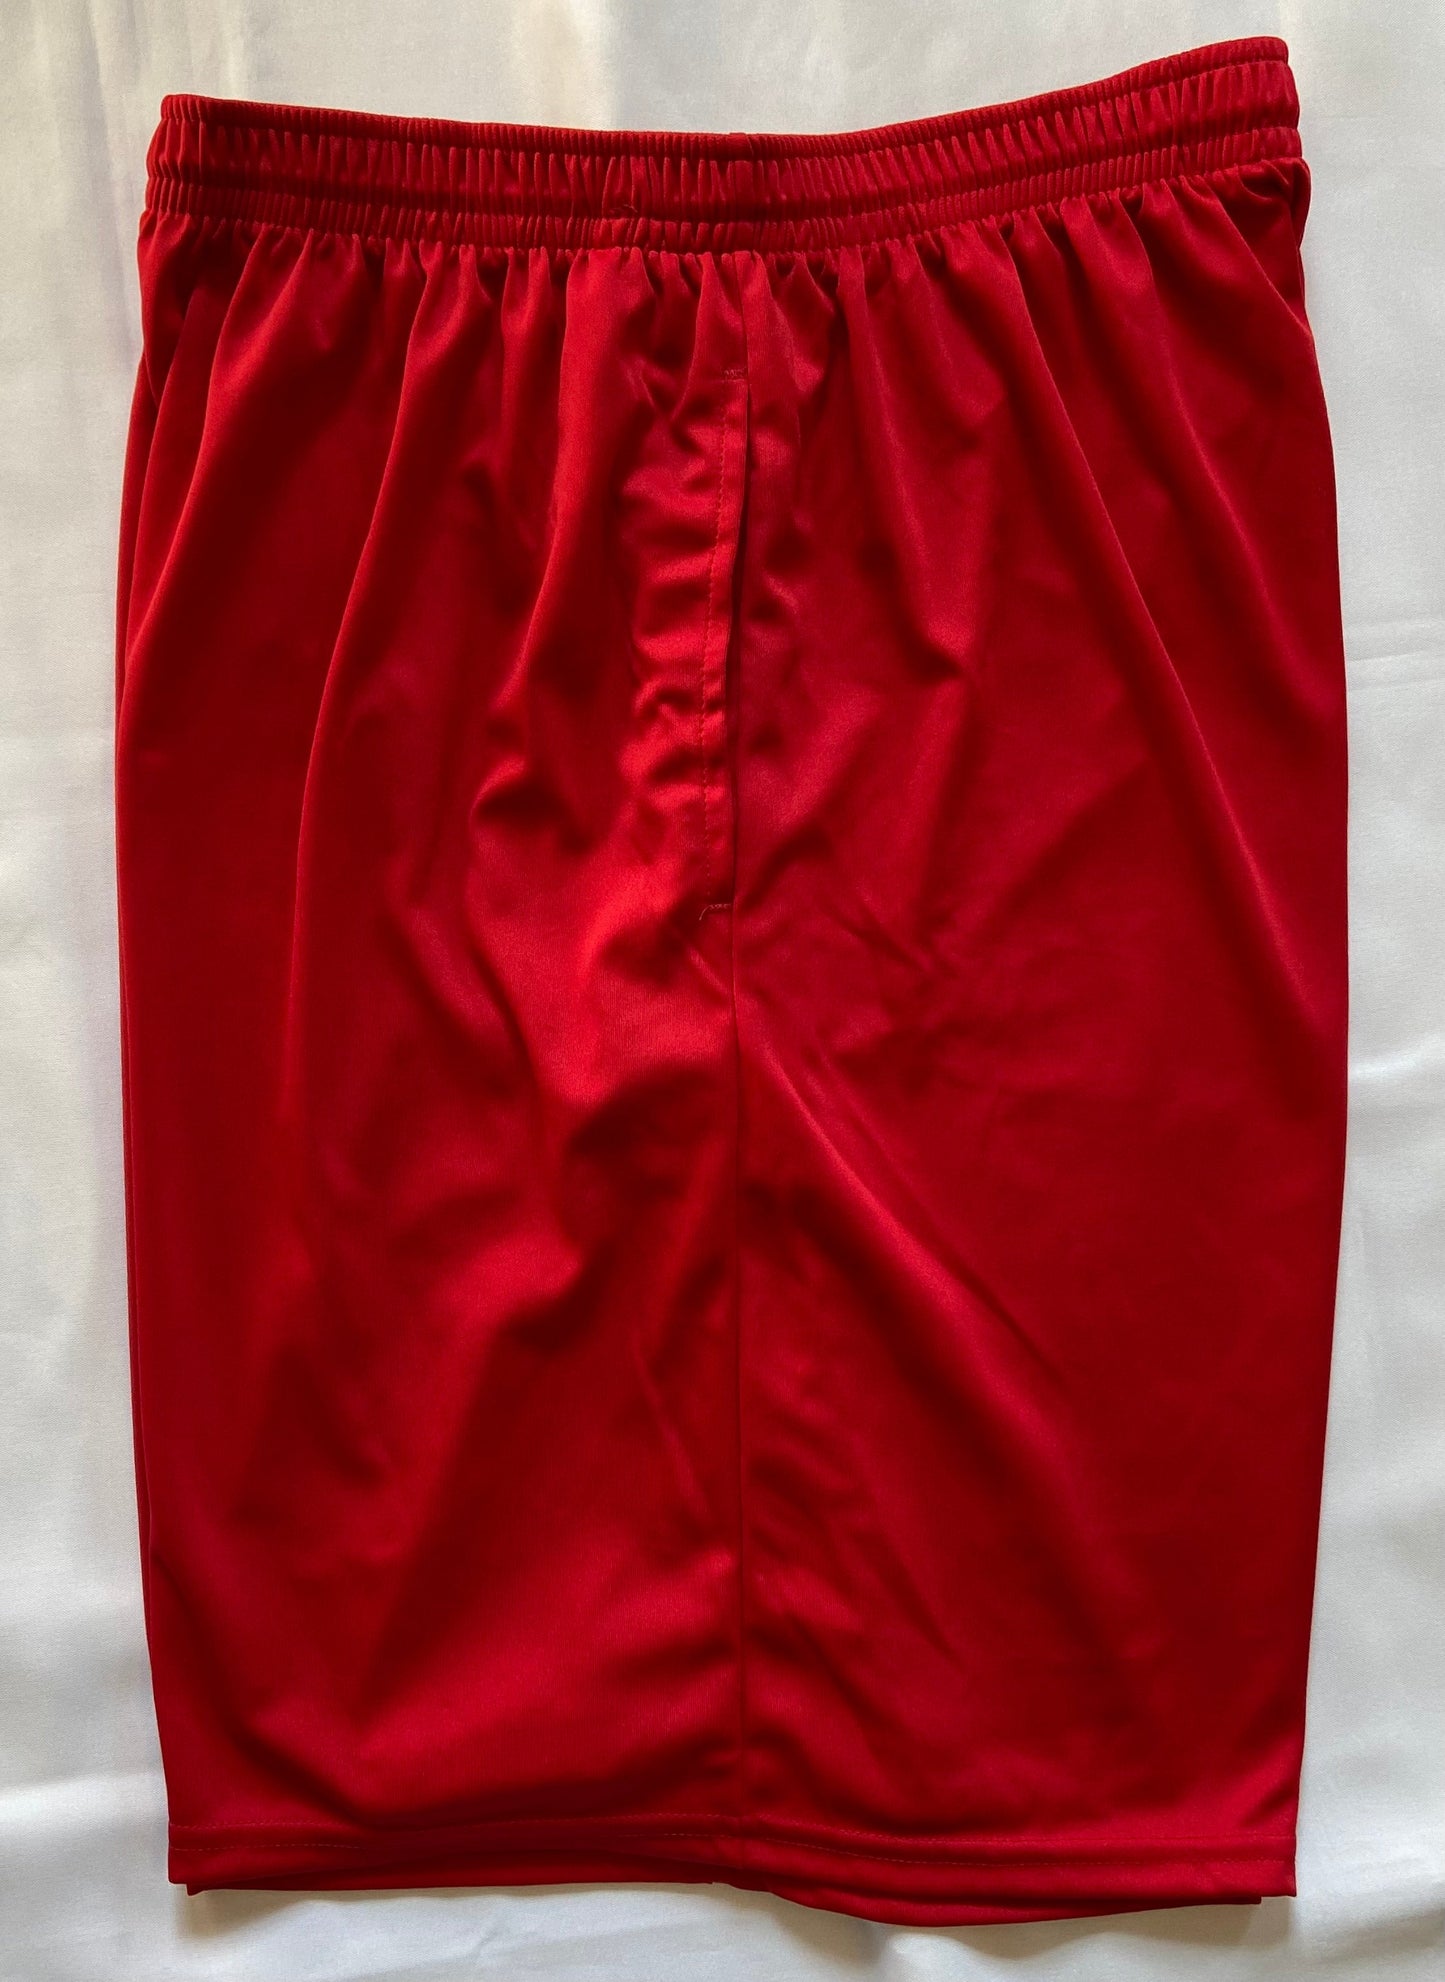 KMS Redskins FOOTBALL Team Shorts with Pockets - Red - Adult and Youth Sizes